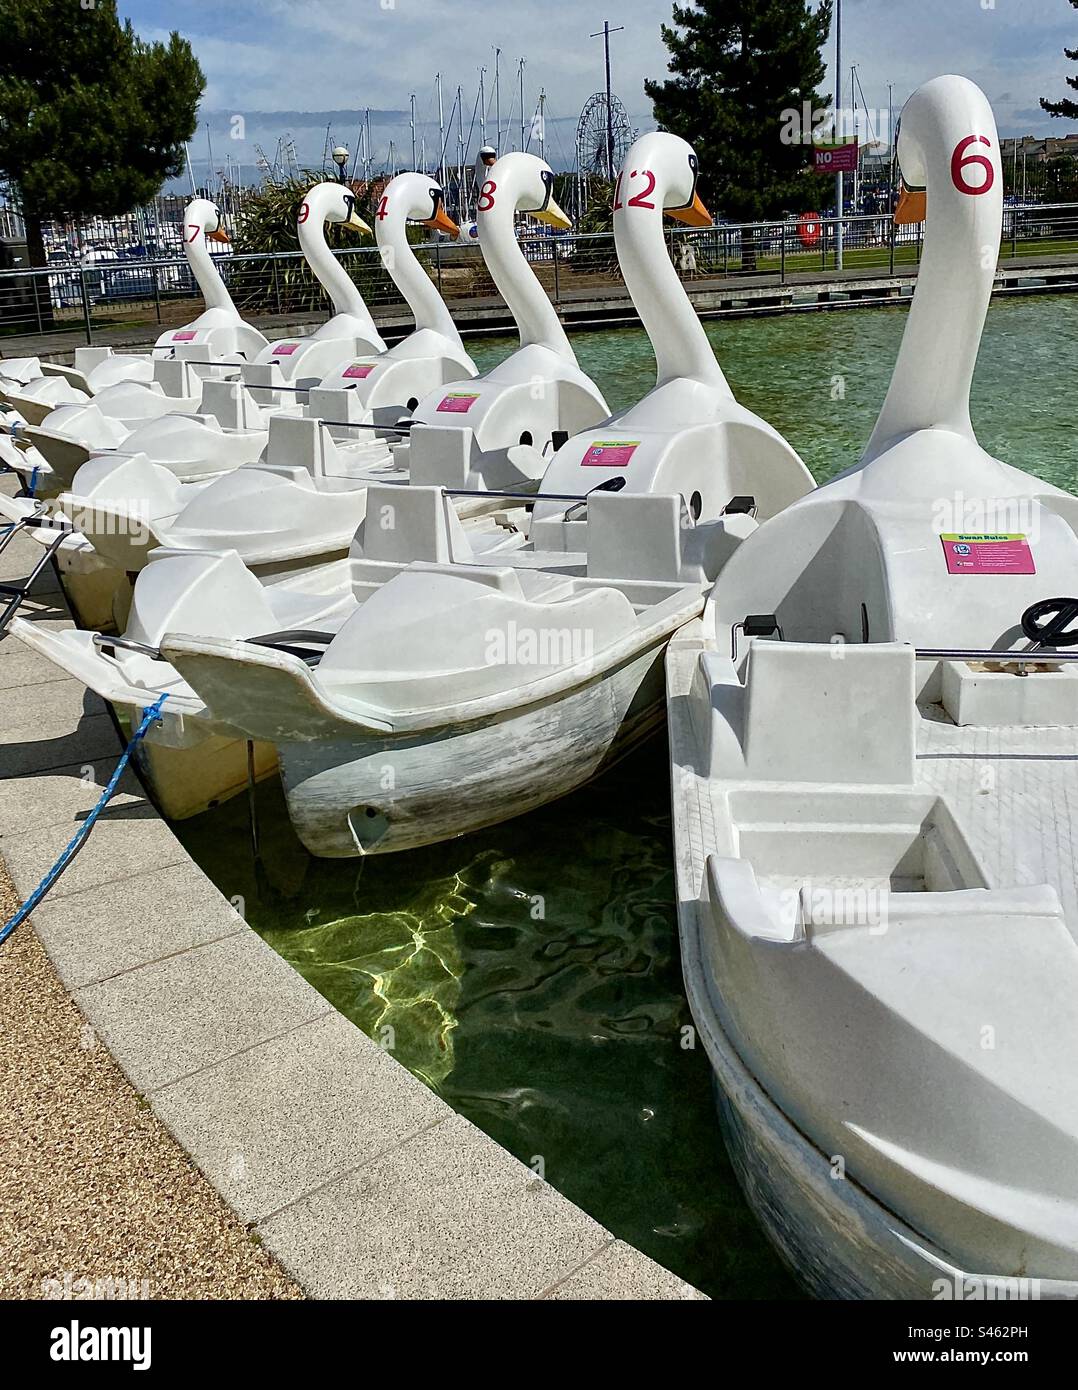 Children’s boats in the form of swans at Bangor, Co. Down, Northern Ireland. Bangor is a popular holiday area with many children’s activities in the Pickie Fun Park near to the marina. Stock Photo